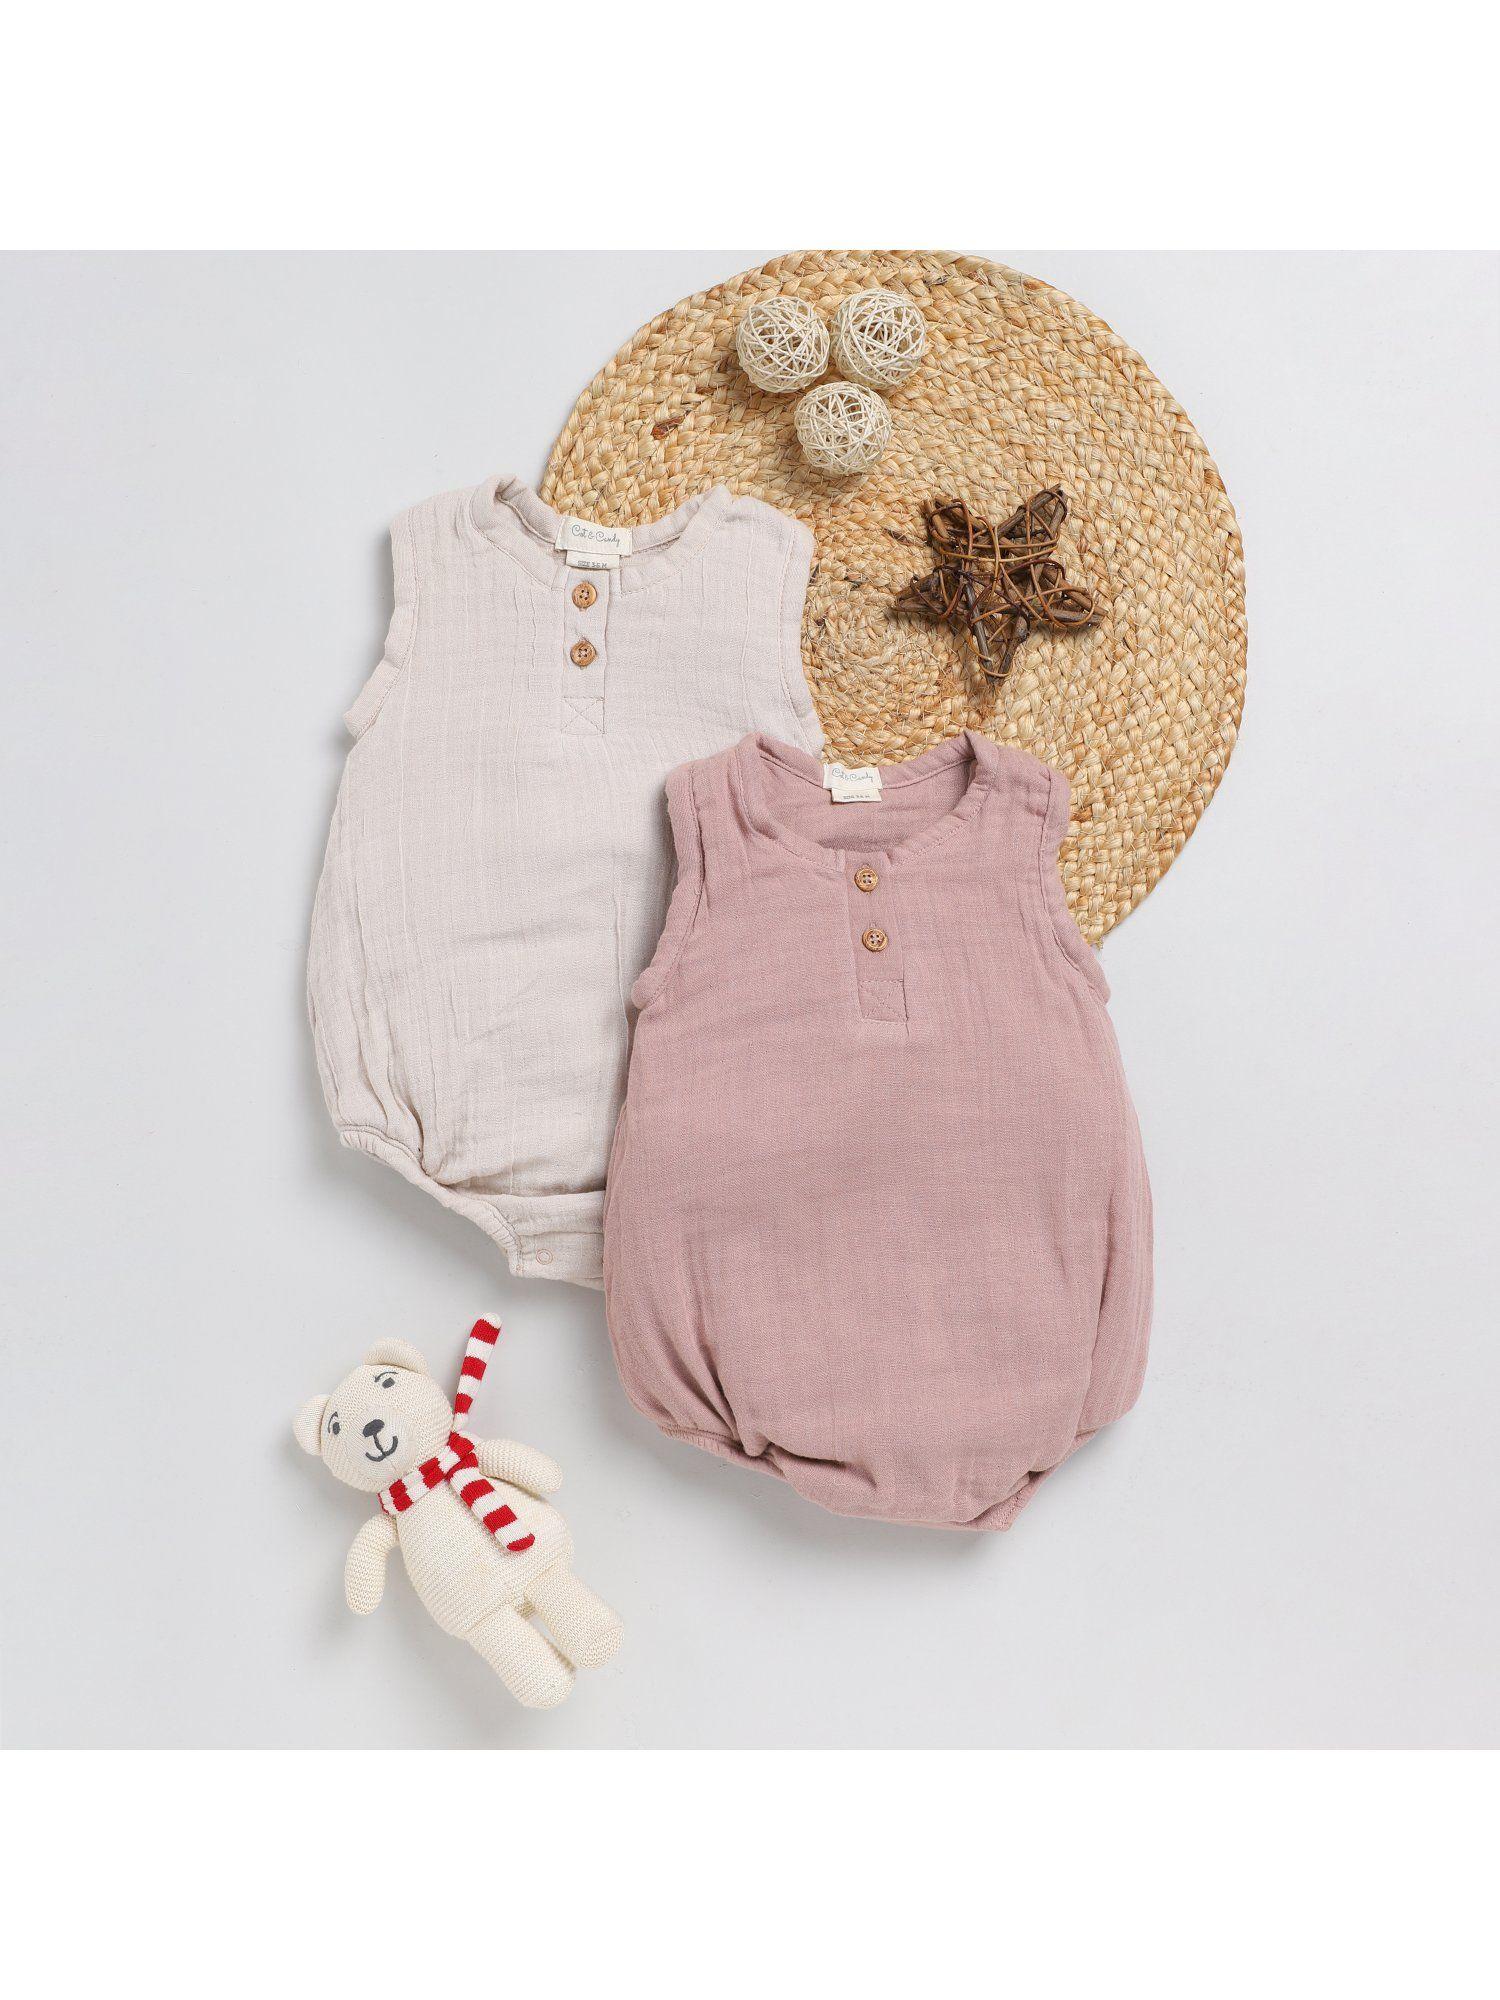 Half Sleeve Oatmeal & Blush Pink Bubble Romper for Kids (Pack of 2)